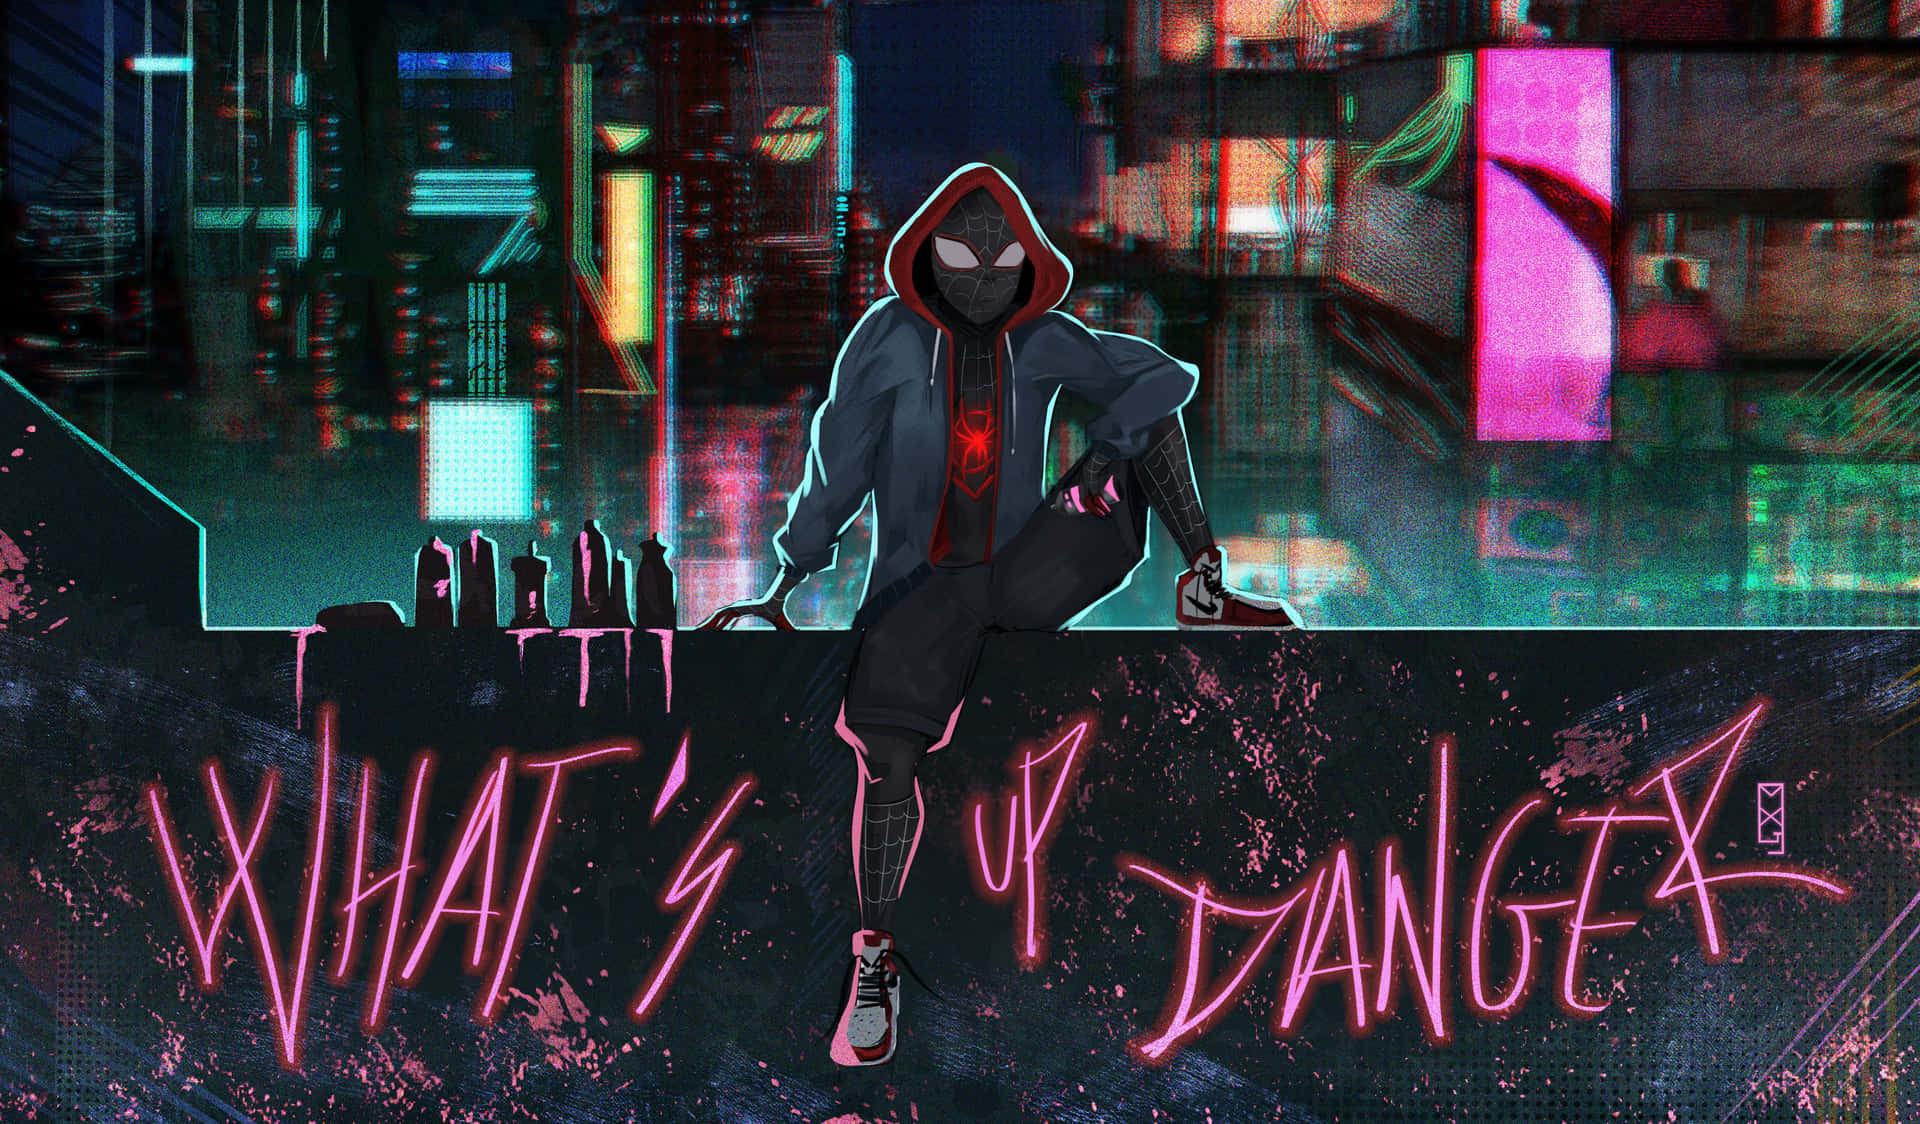 What's Danger? - A Poster For The Game Wallpaper